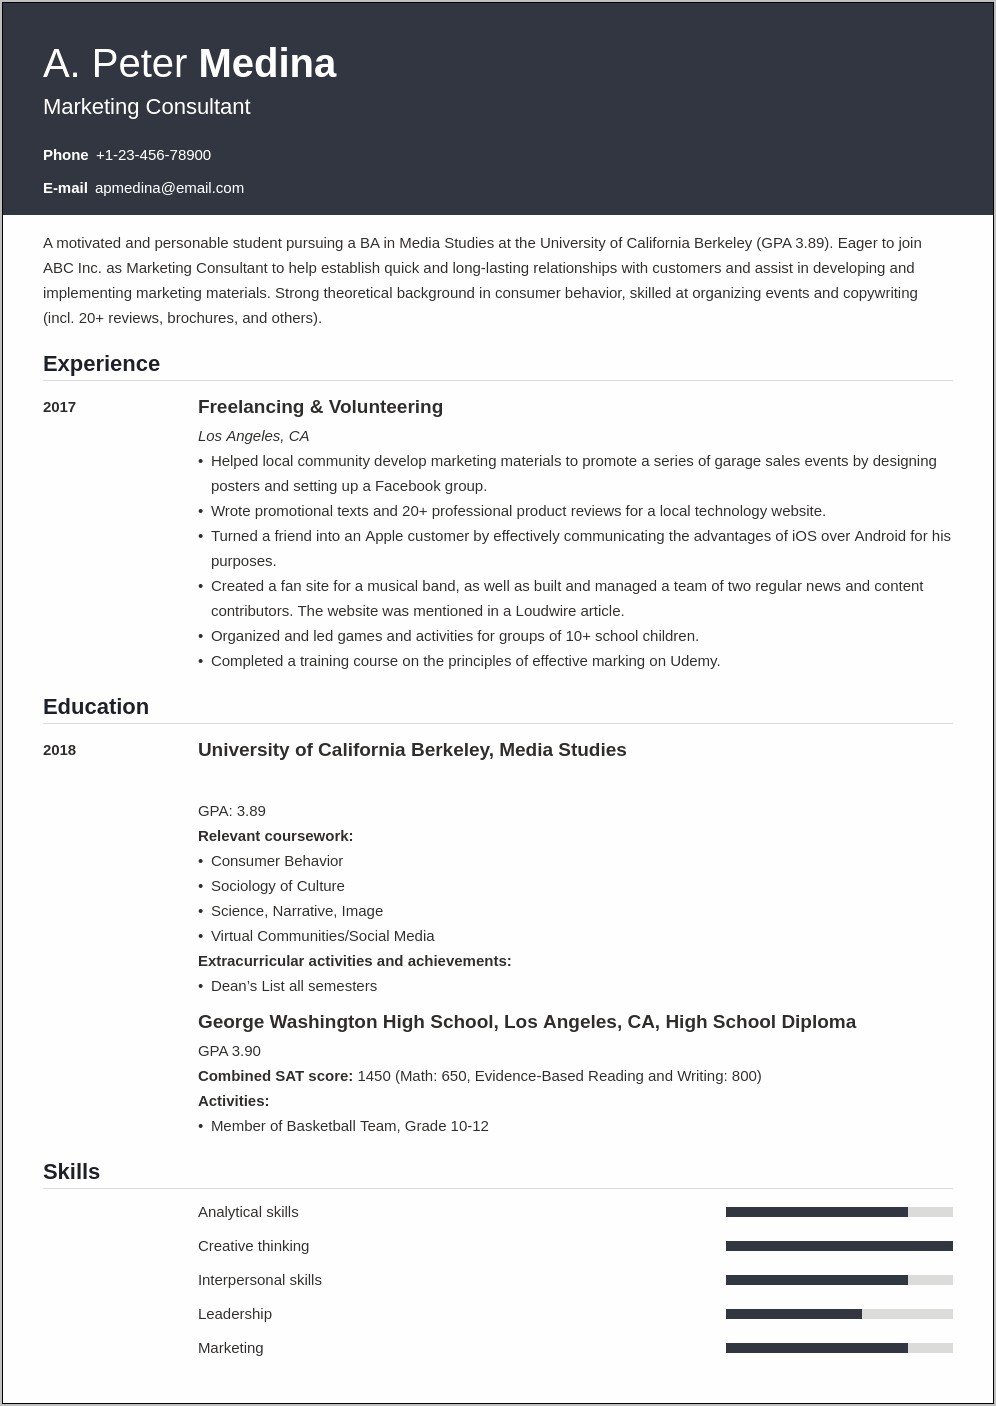 resume-template-for-20-years-experience-resume-example-gallery